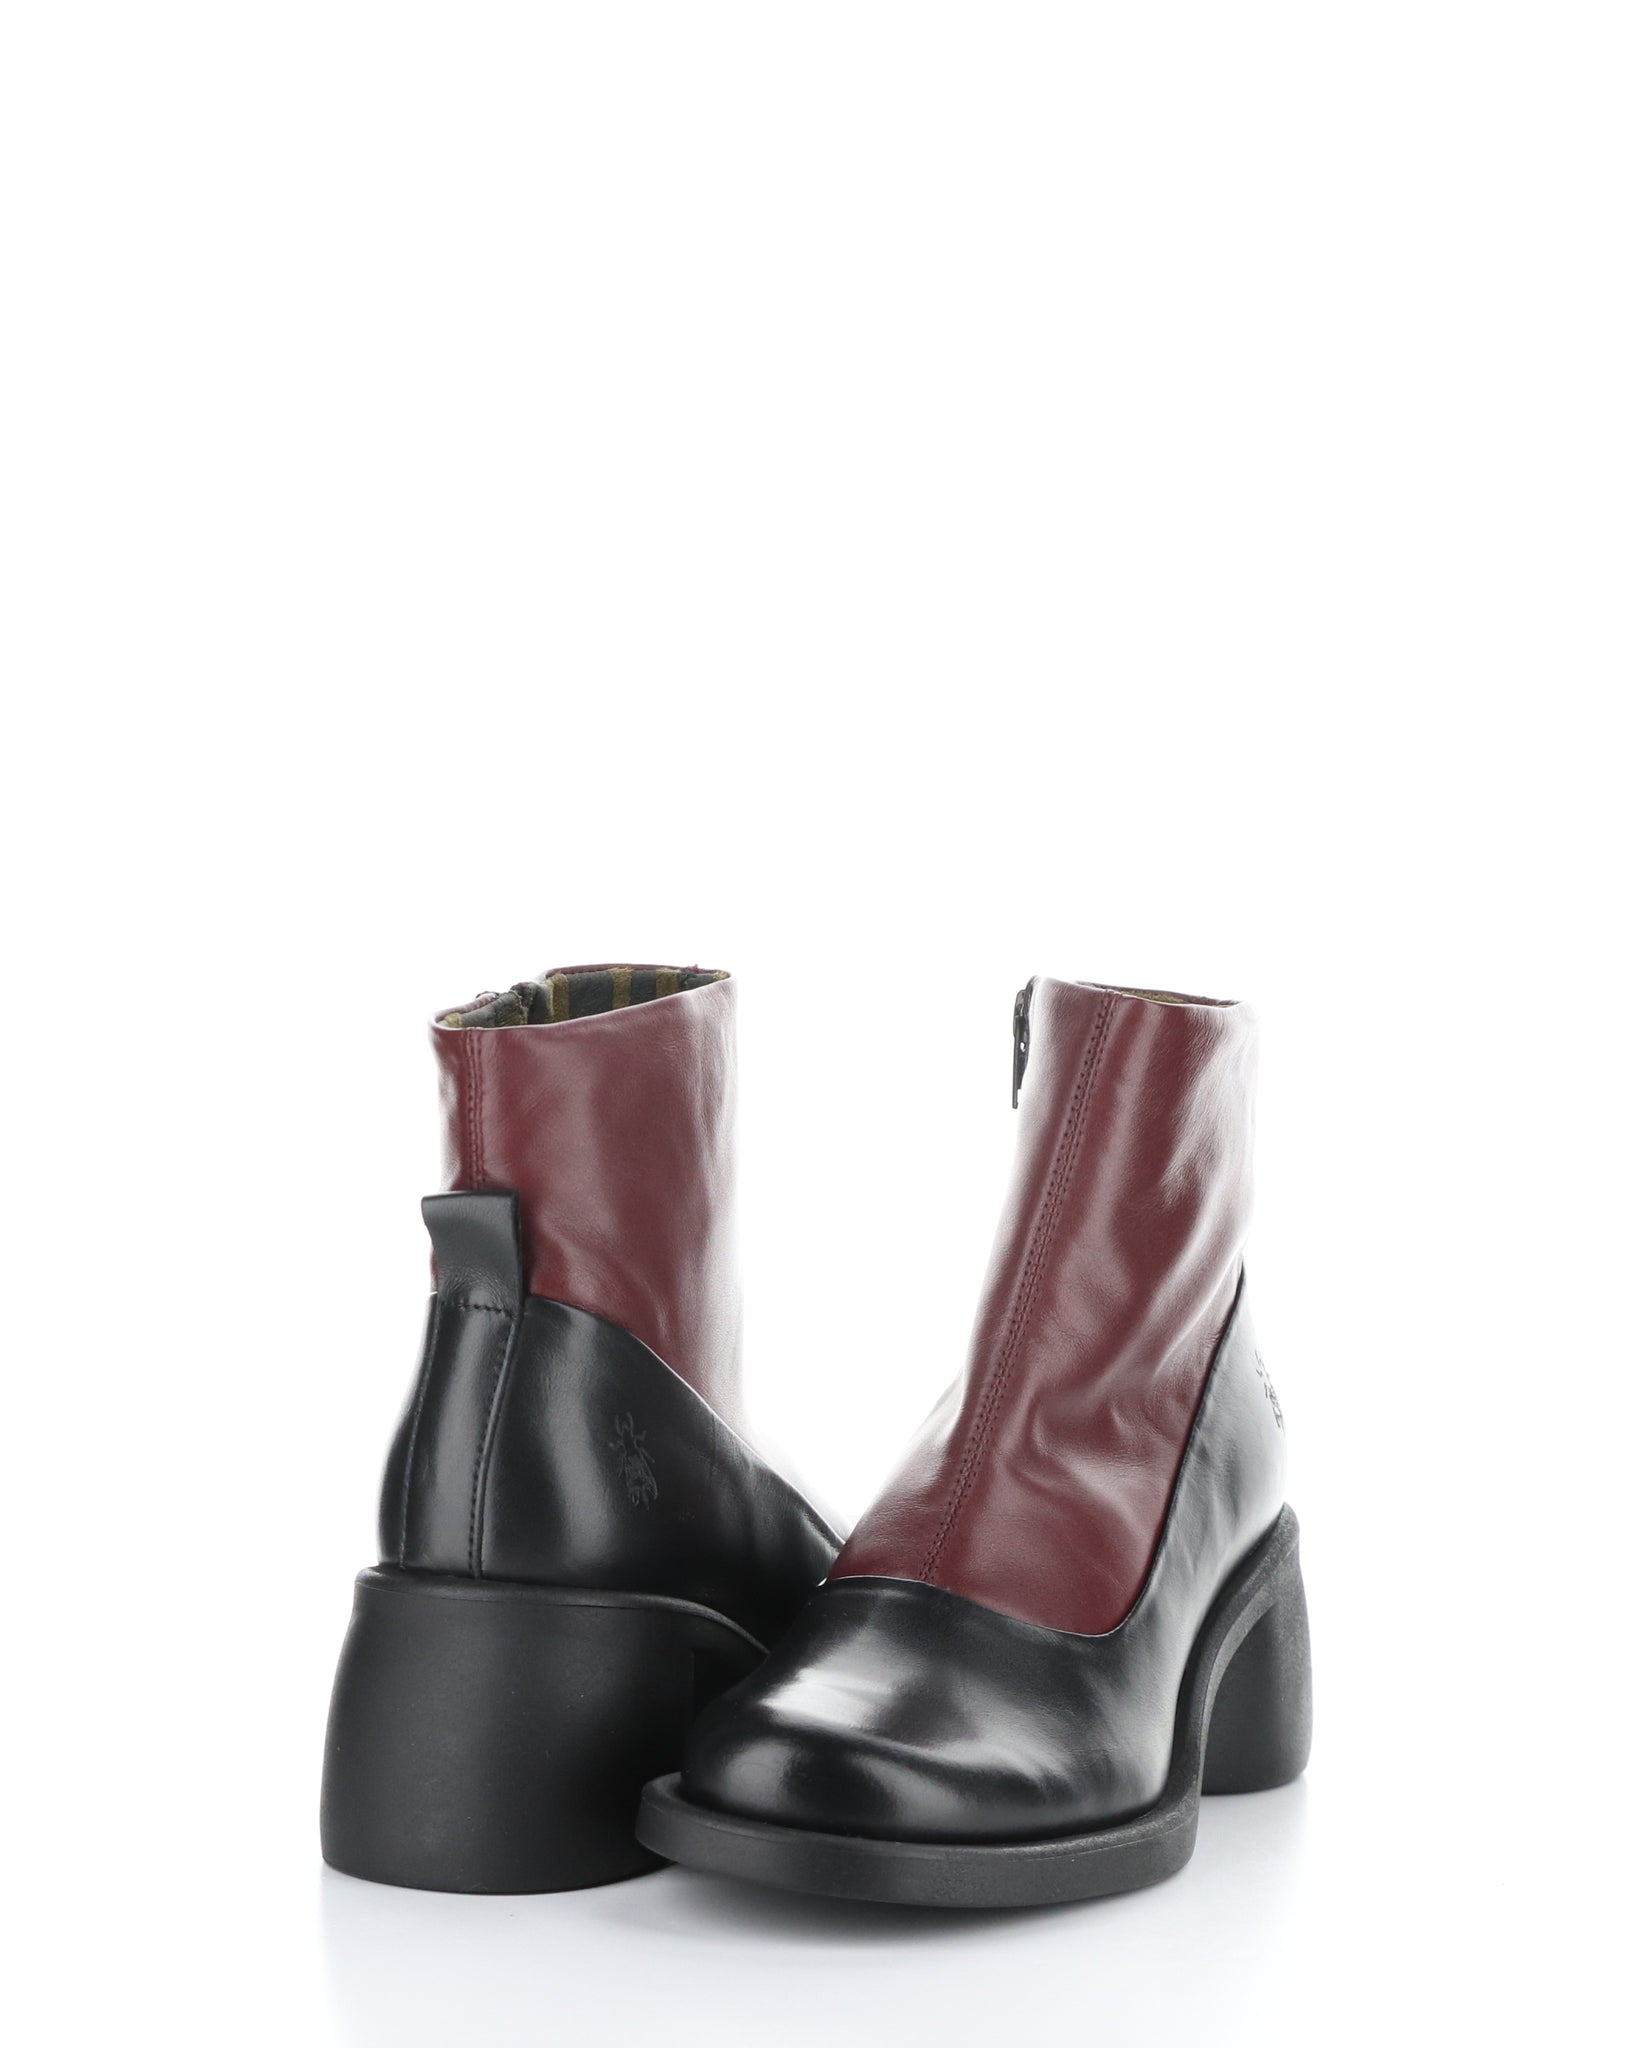 Fly London "Hint" Black/Wine - Ankle Boot